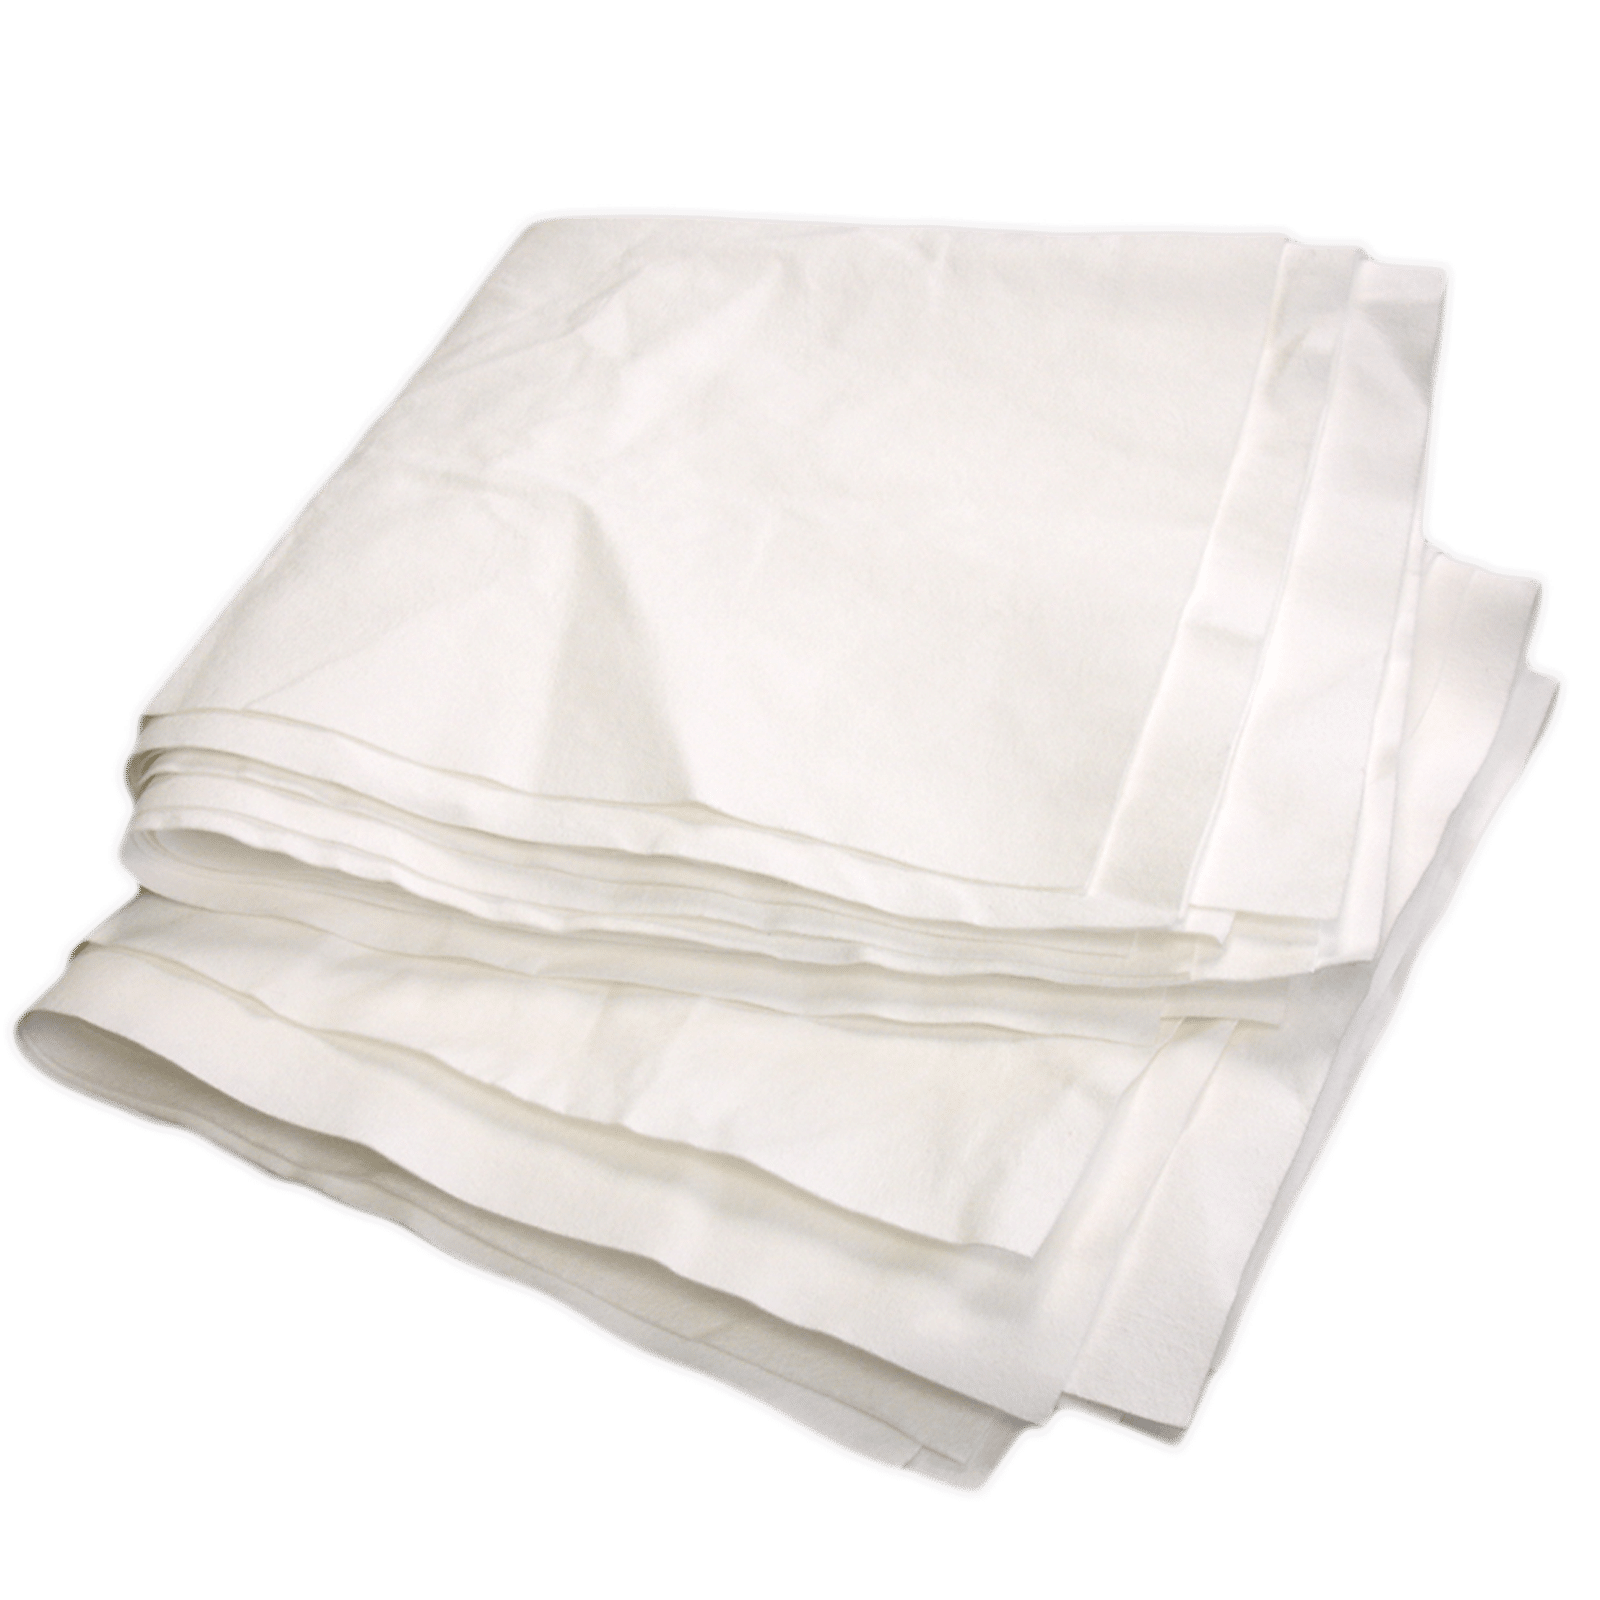 Lint Free Cleaning Rags - 25 Pound Box: Harper Online Shopping